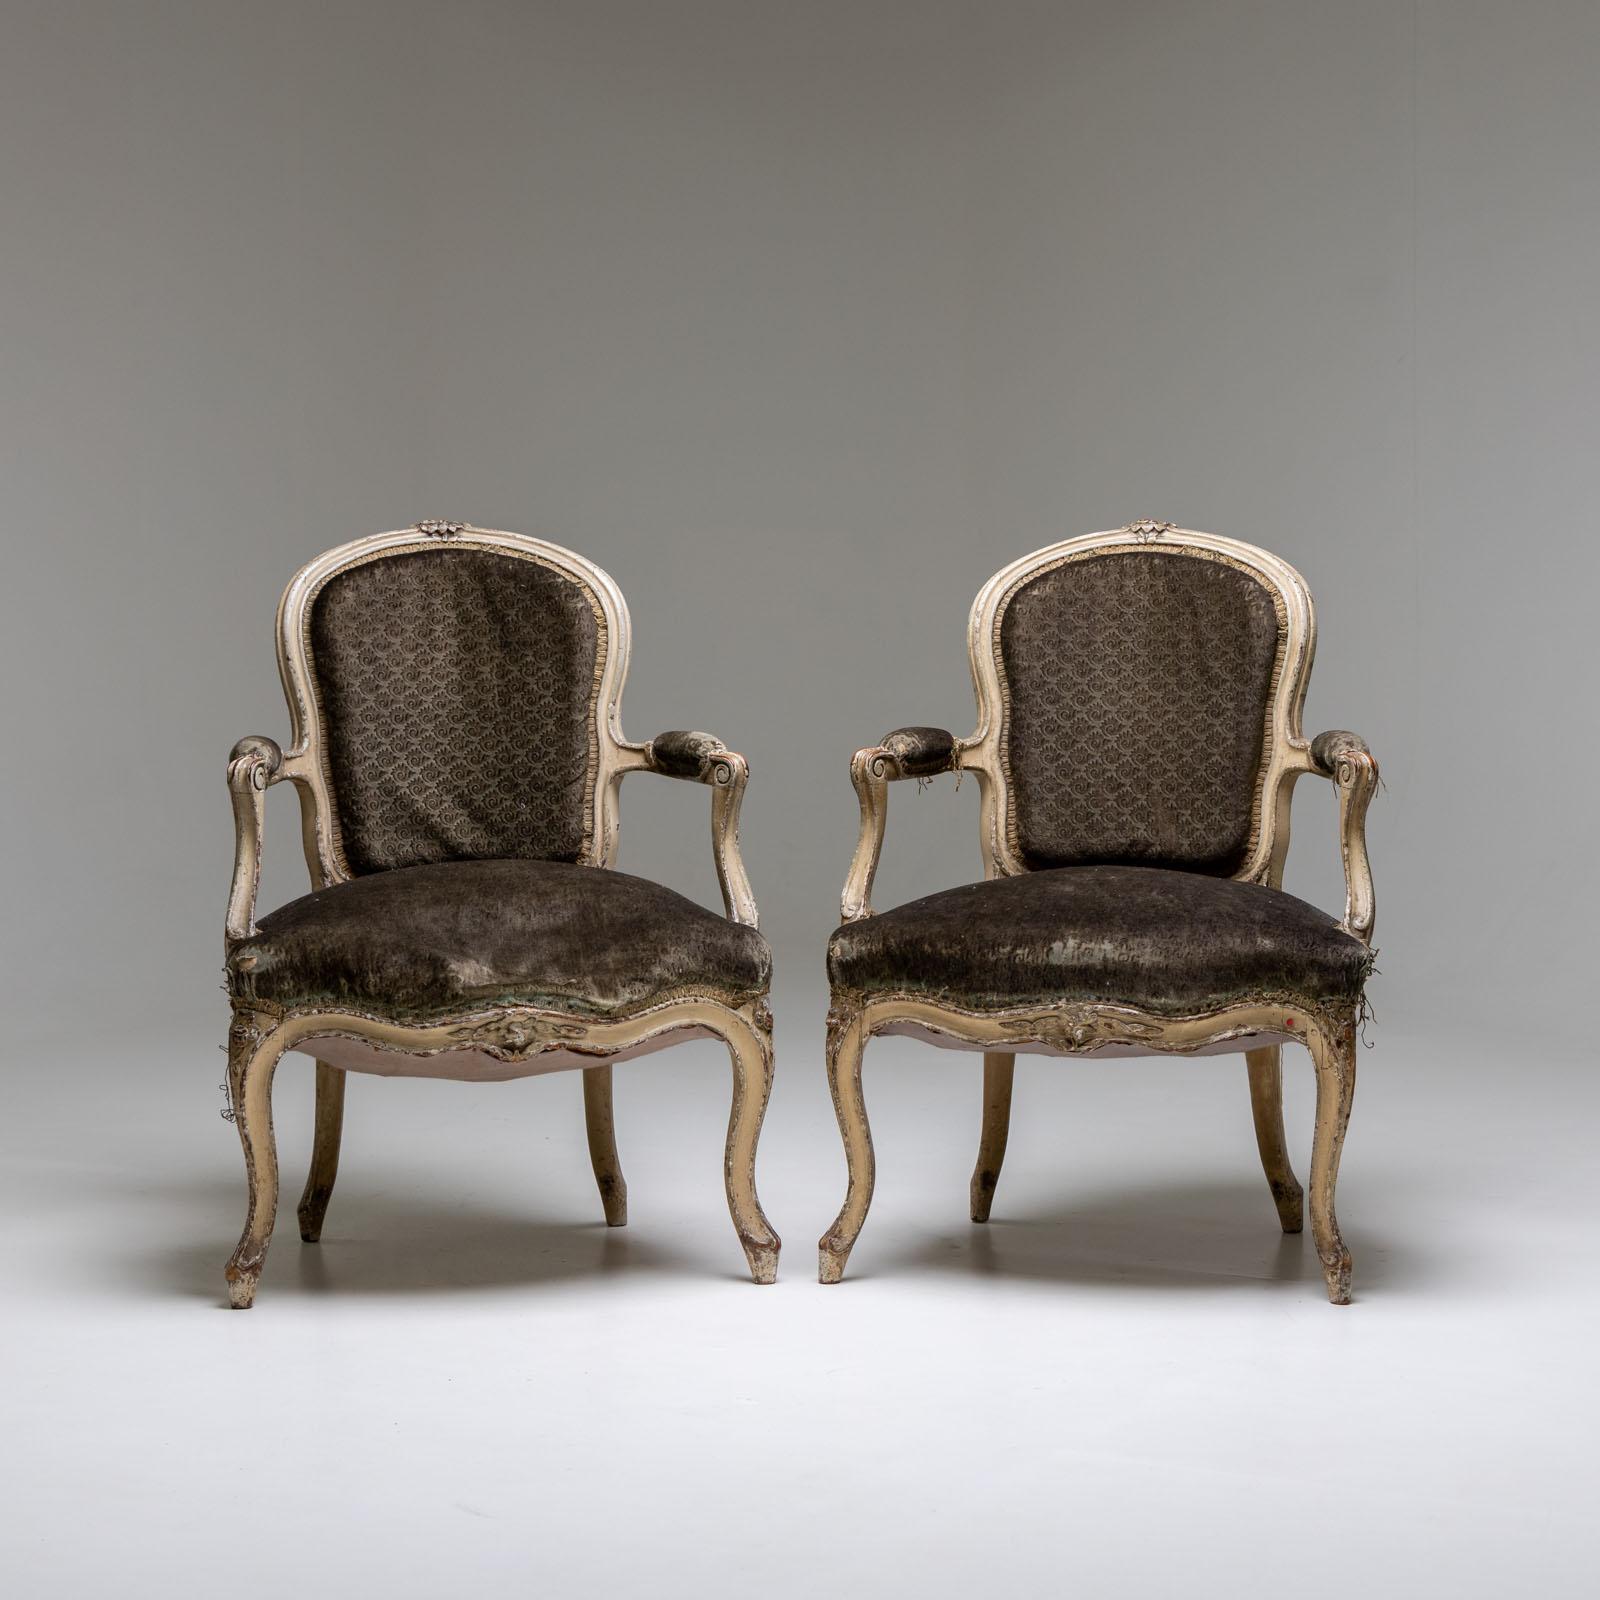 Pair of armchairs with curved frames and S-shaped legs. The seat, backrest and armrests are upholstered. The armchairs have a white patina and are in used condition.